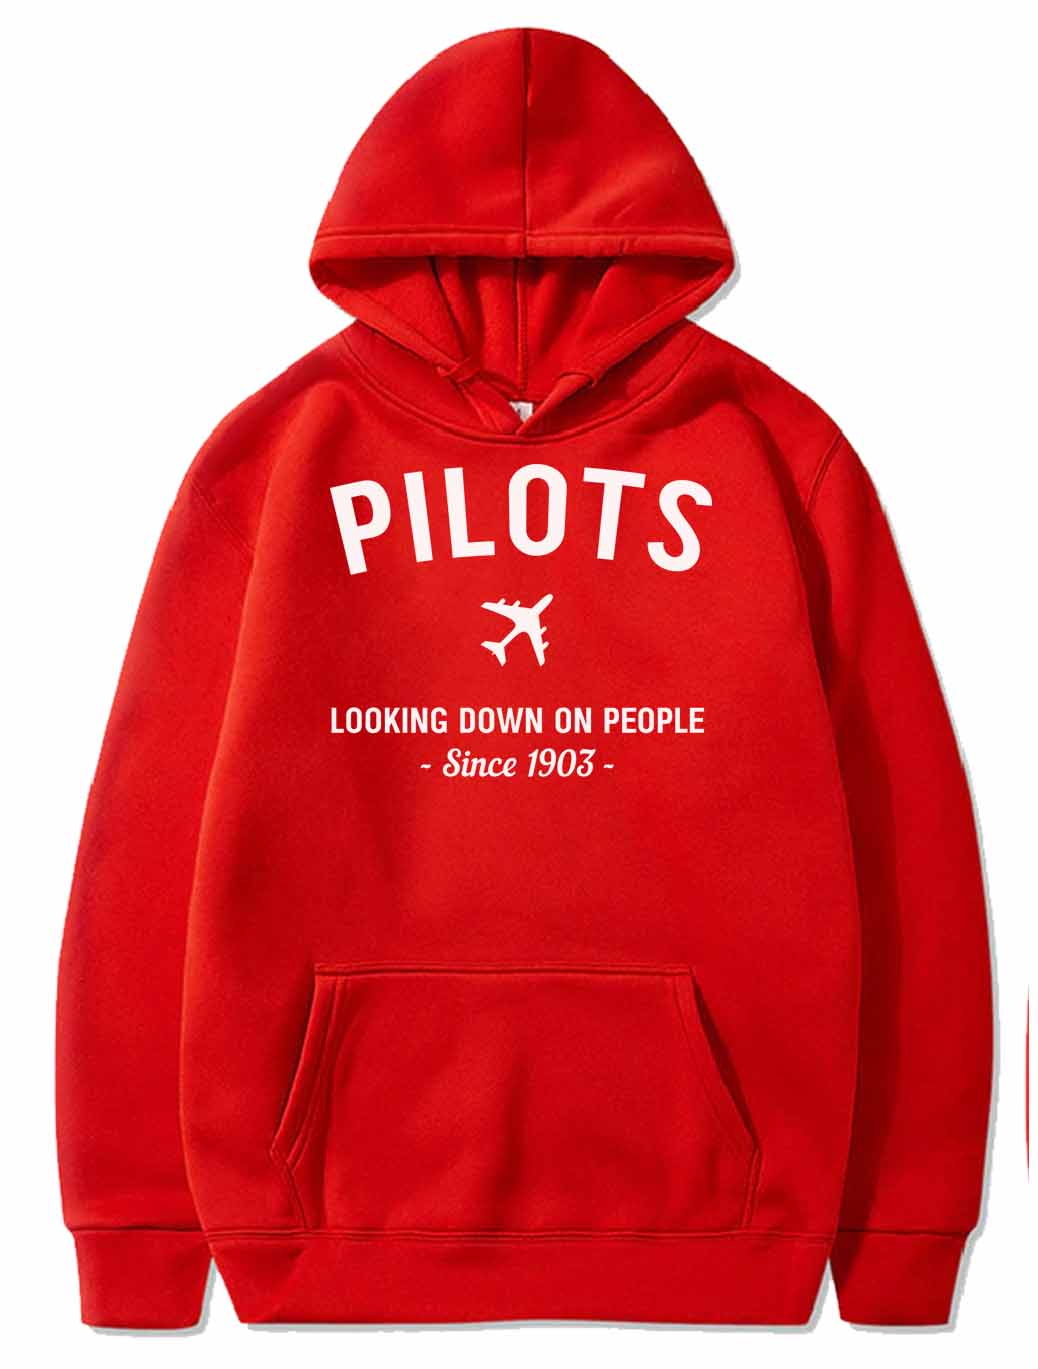 Pilots. Looking down on people since 1903 PULLOVER THE AV8R